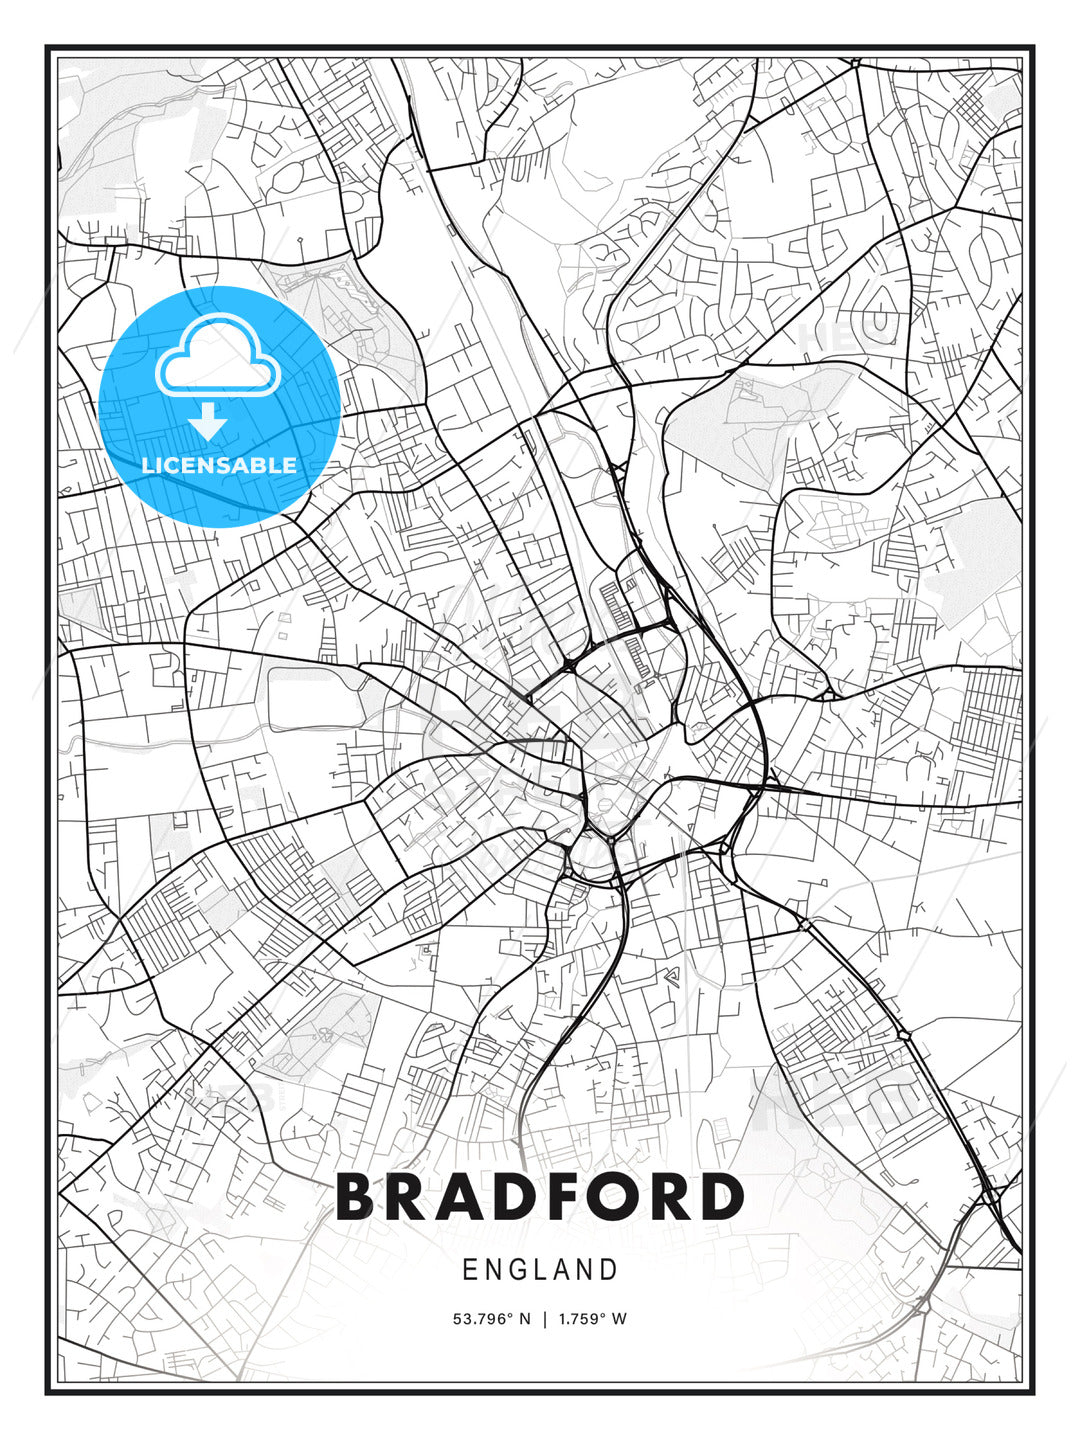 Bradford, England, Modern Print Template in Various Formats - HEBSTREITS Sketches